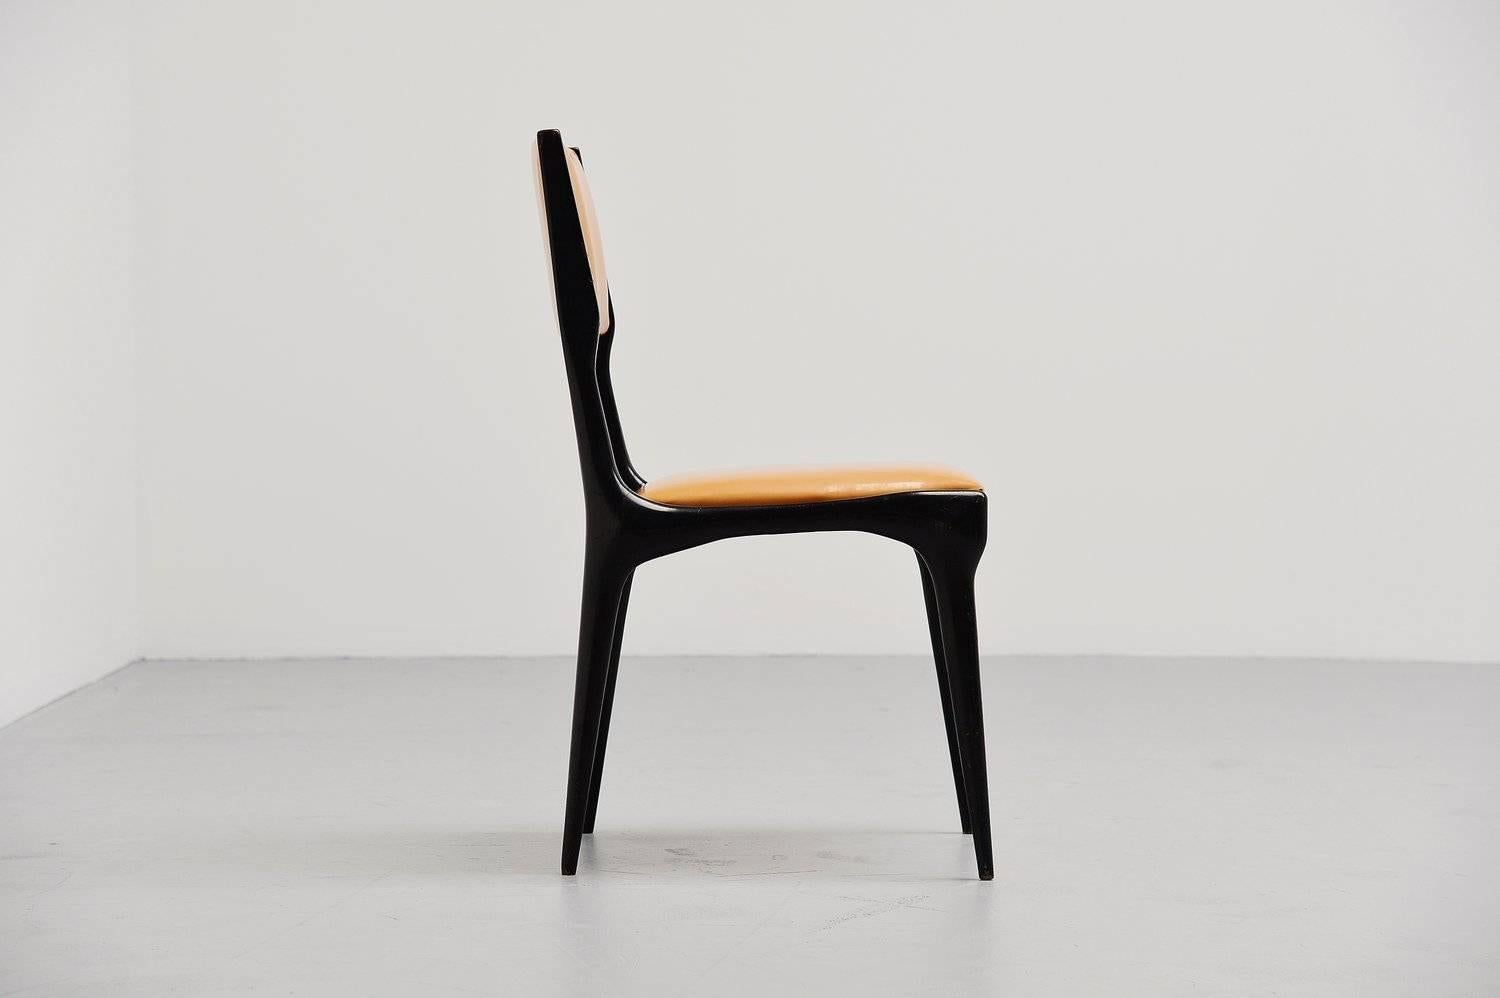 Rare side chair from the Parco dei Principi, Roma. Designed by Carlo de Carli and Gio Ponti for Cassina, Italy, 1954. This chair has a black lacquered walnut frame and still has its original orange brown faux leather upholstery. The chair is in very